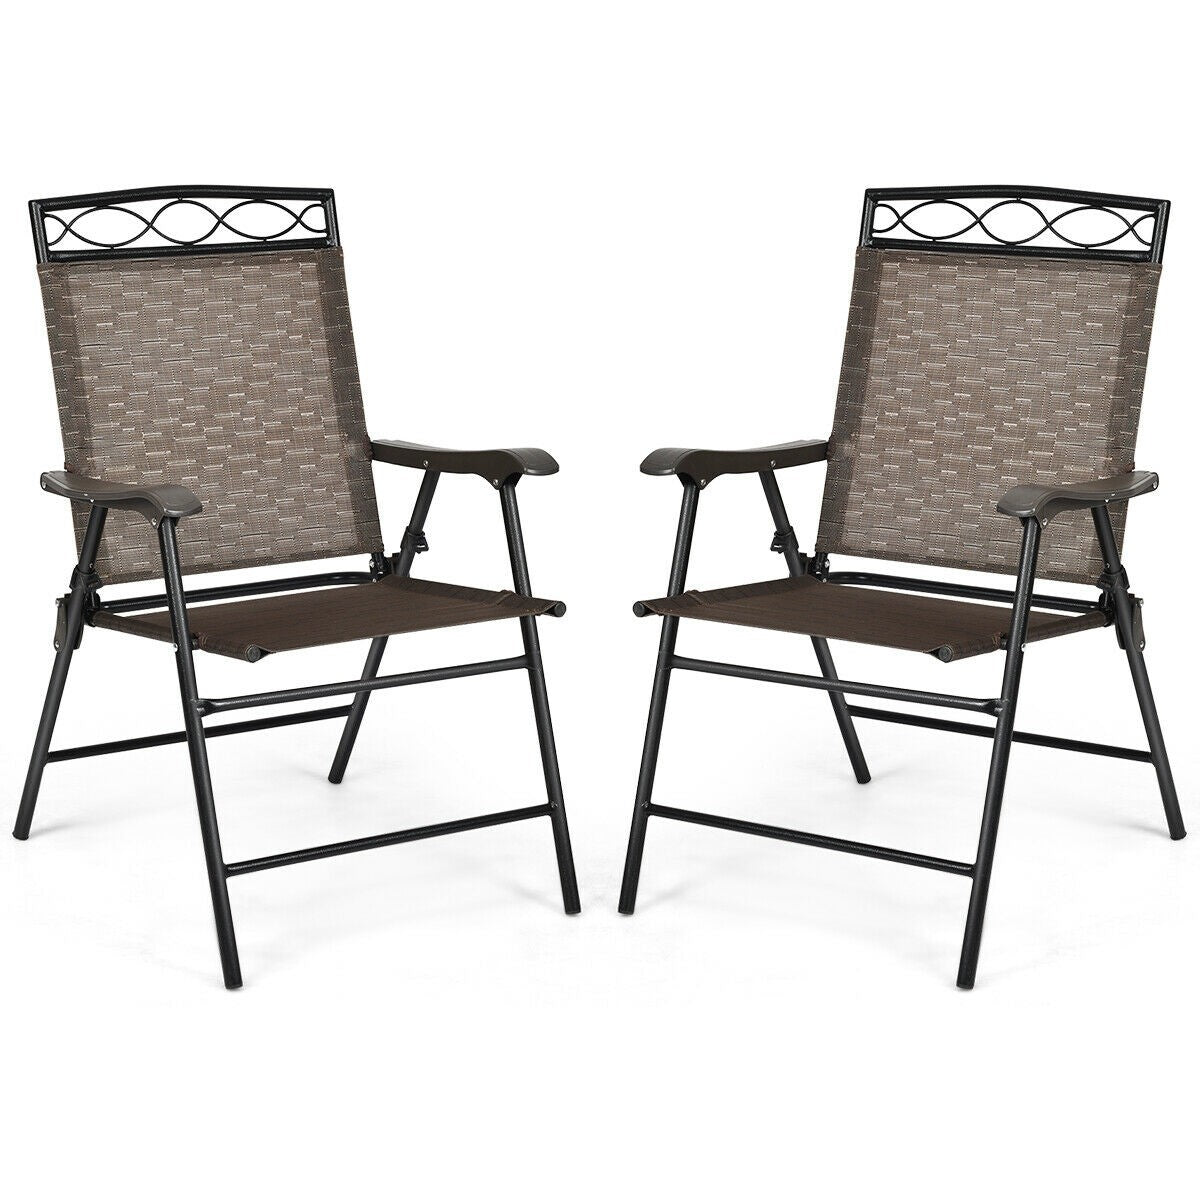 Set of 2 Patio Chairs, Outdoor Folding Lawn Chairs for Beach